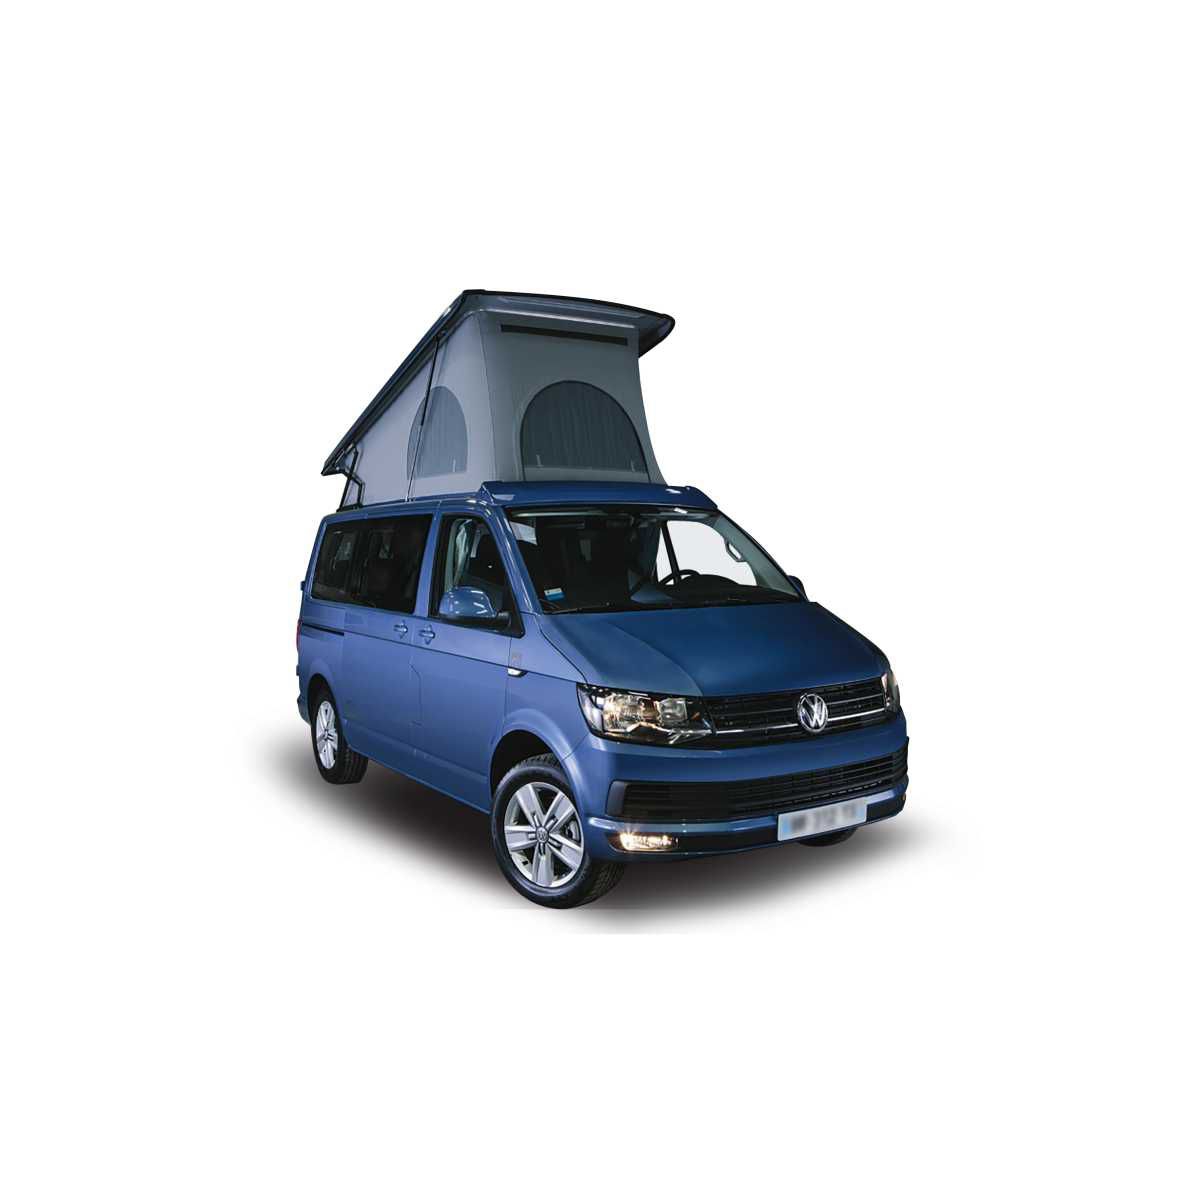 CLAIRVAL Thermomatte THERMICAMP Roof VW T4 California Bj- 09-1990 - 12-1995 Art- Nr. LTMVW01